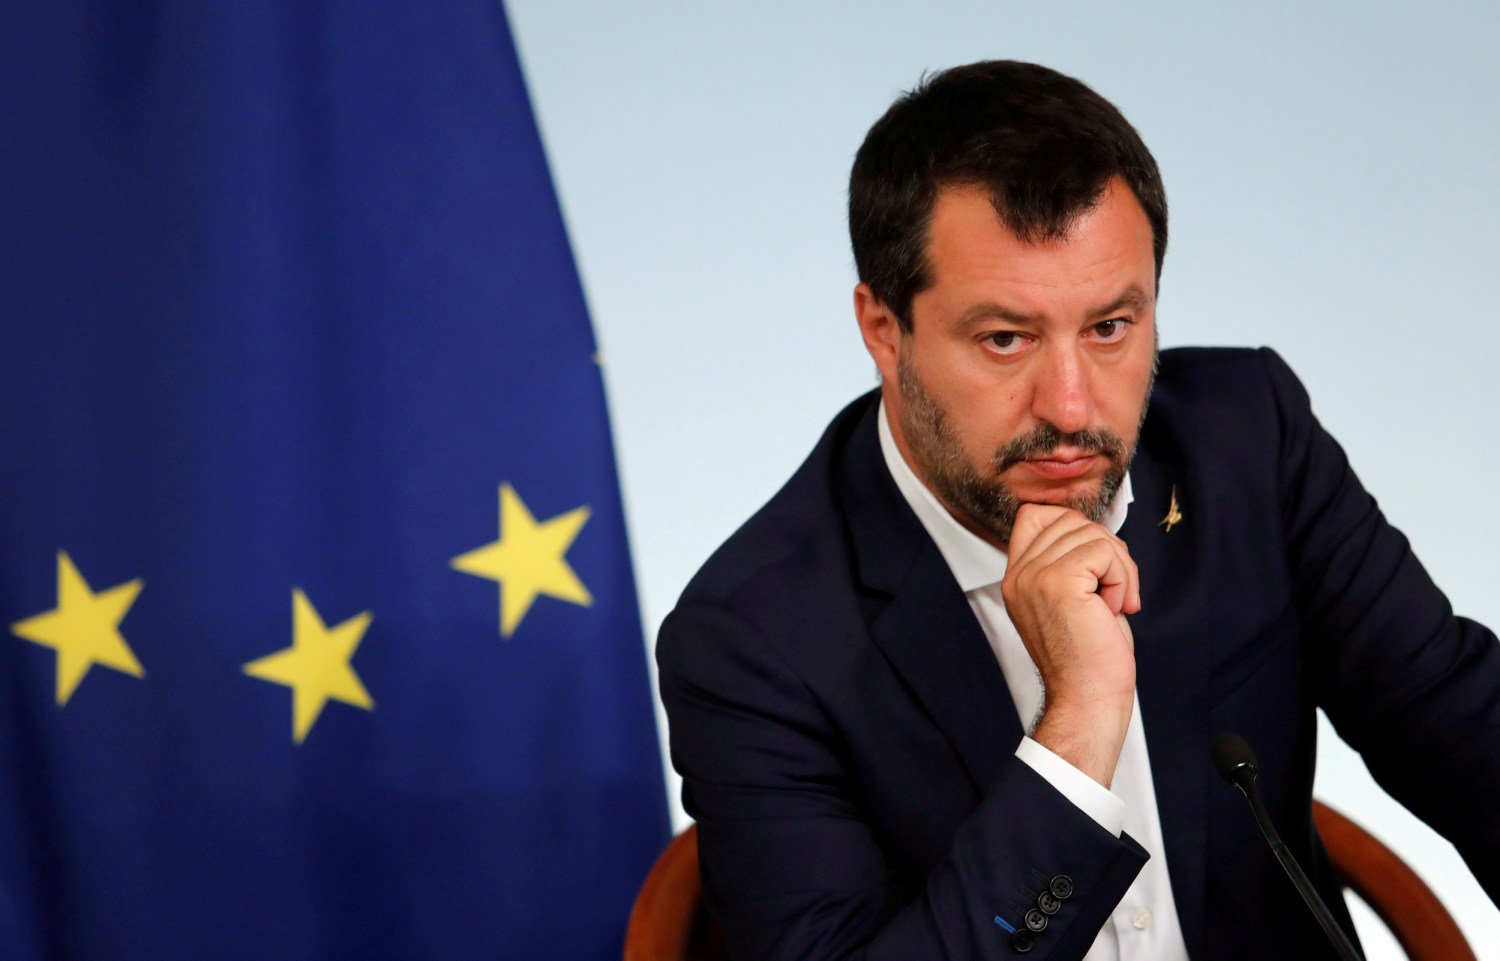 Italian Deputy Prime Minister Matteo Salvini attends a joint news conference following a cabinet meeting in Rome, Italy, June 11, 2019 REUTERS/Remo Casilli     TPX IMAGES OF THE DAY - RC19CD967310